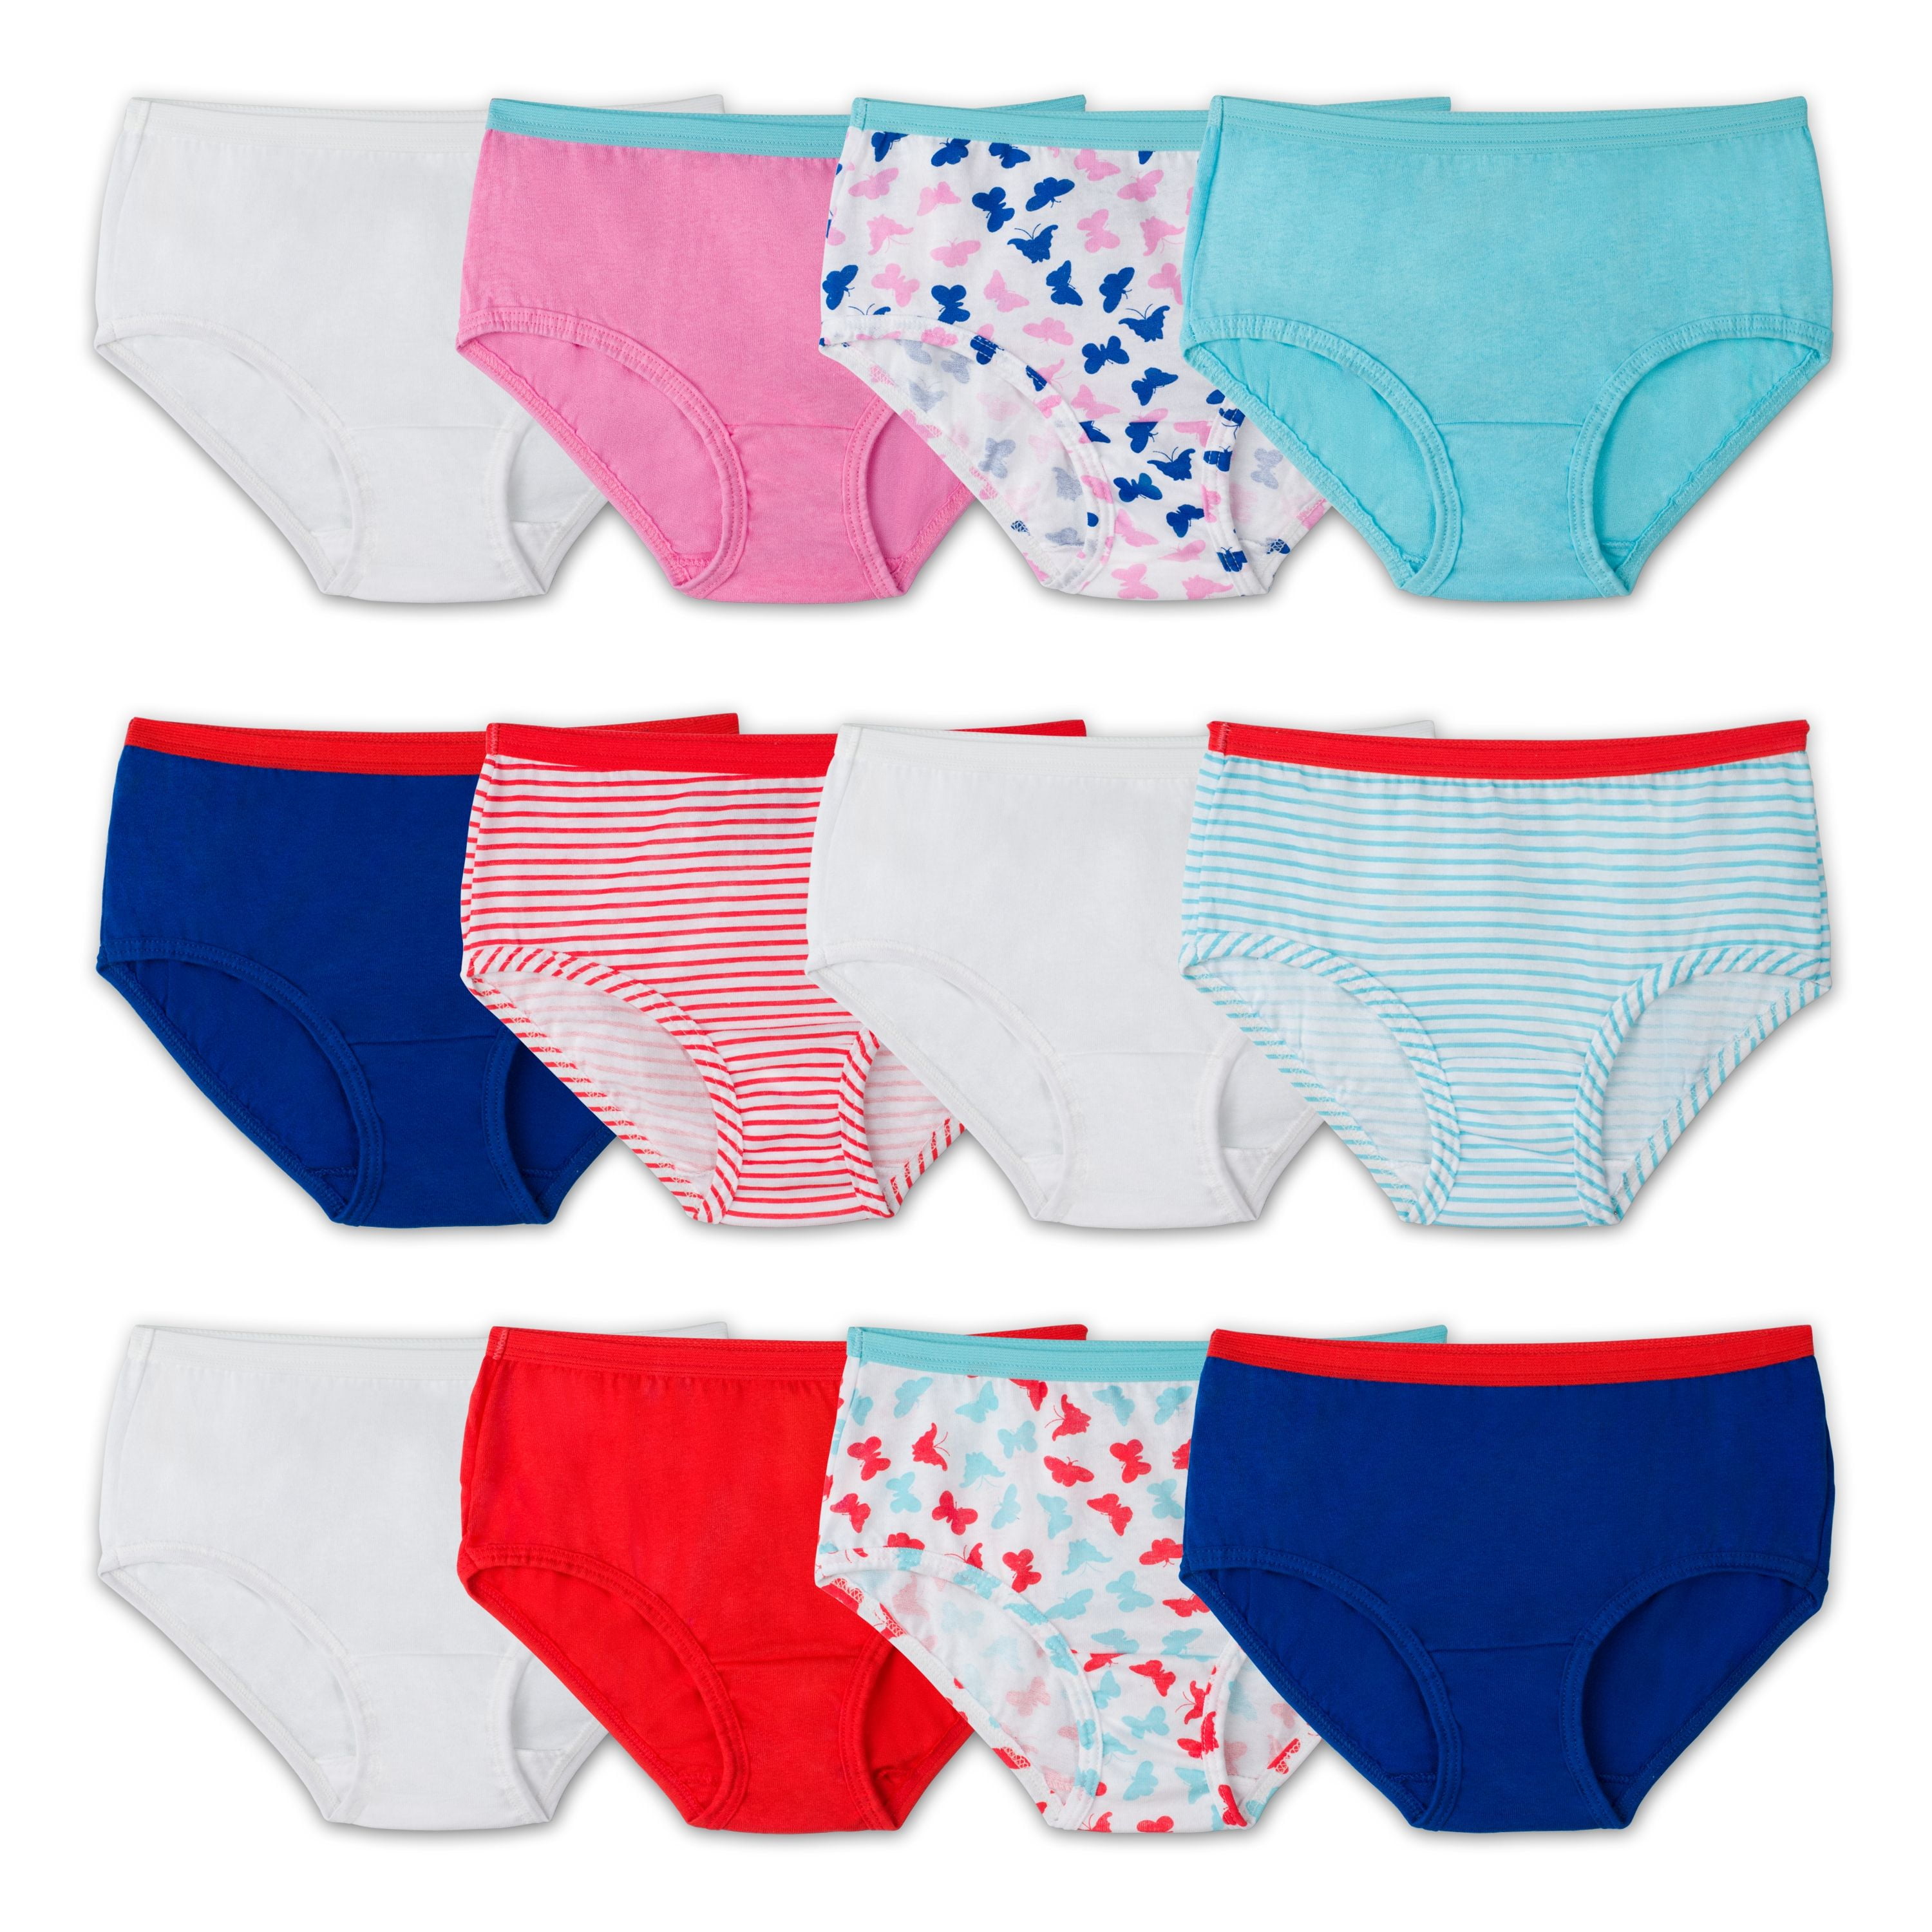 Fruit of the Loom Girls Assorted Cotton Brief Underwear, 12 Pack Panties  Sizes 4 - 14